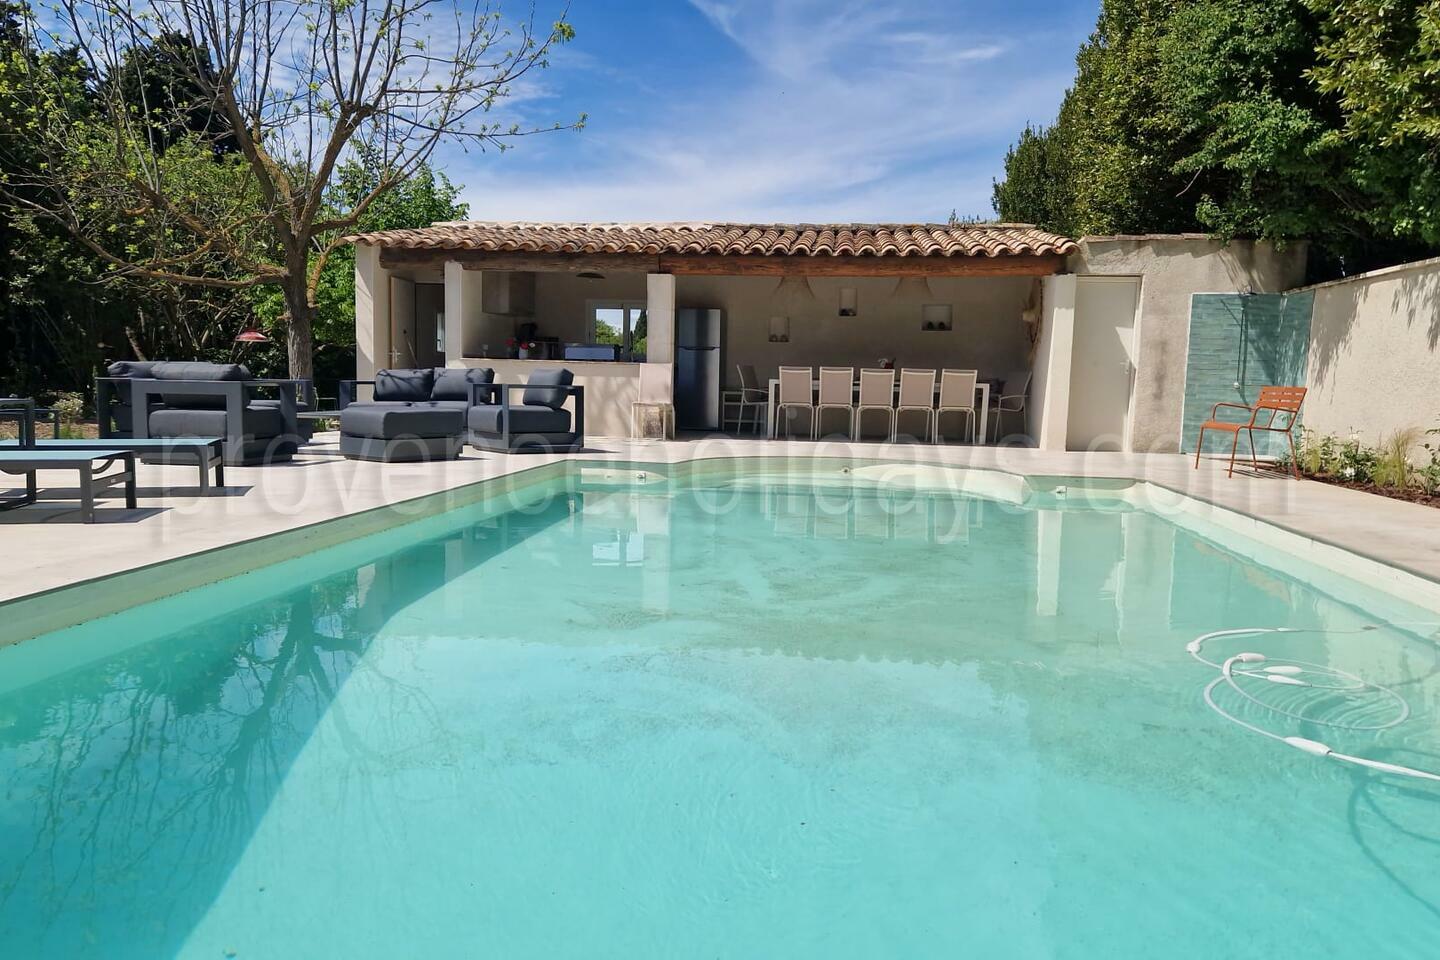 Holiday rental with heated swimming pool in Saint-Rémy-de-Provence 1 - Maison des Alpilles: Villa: Pool